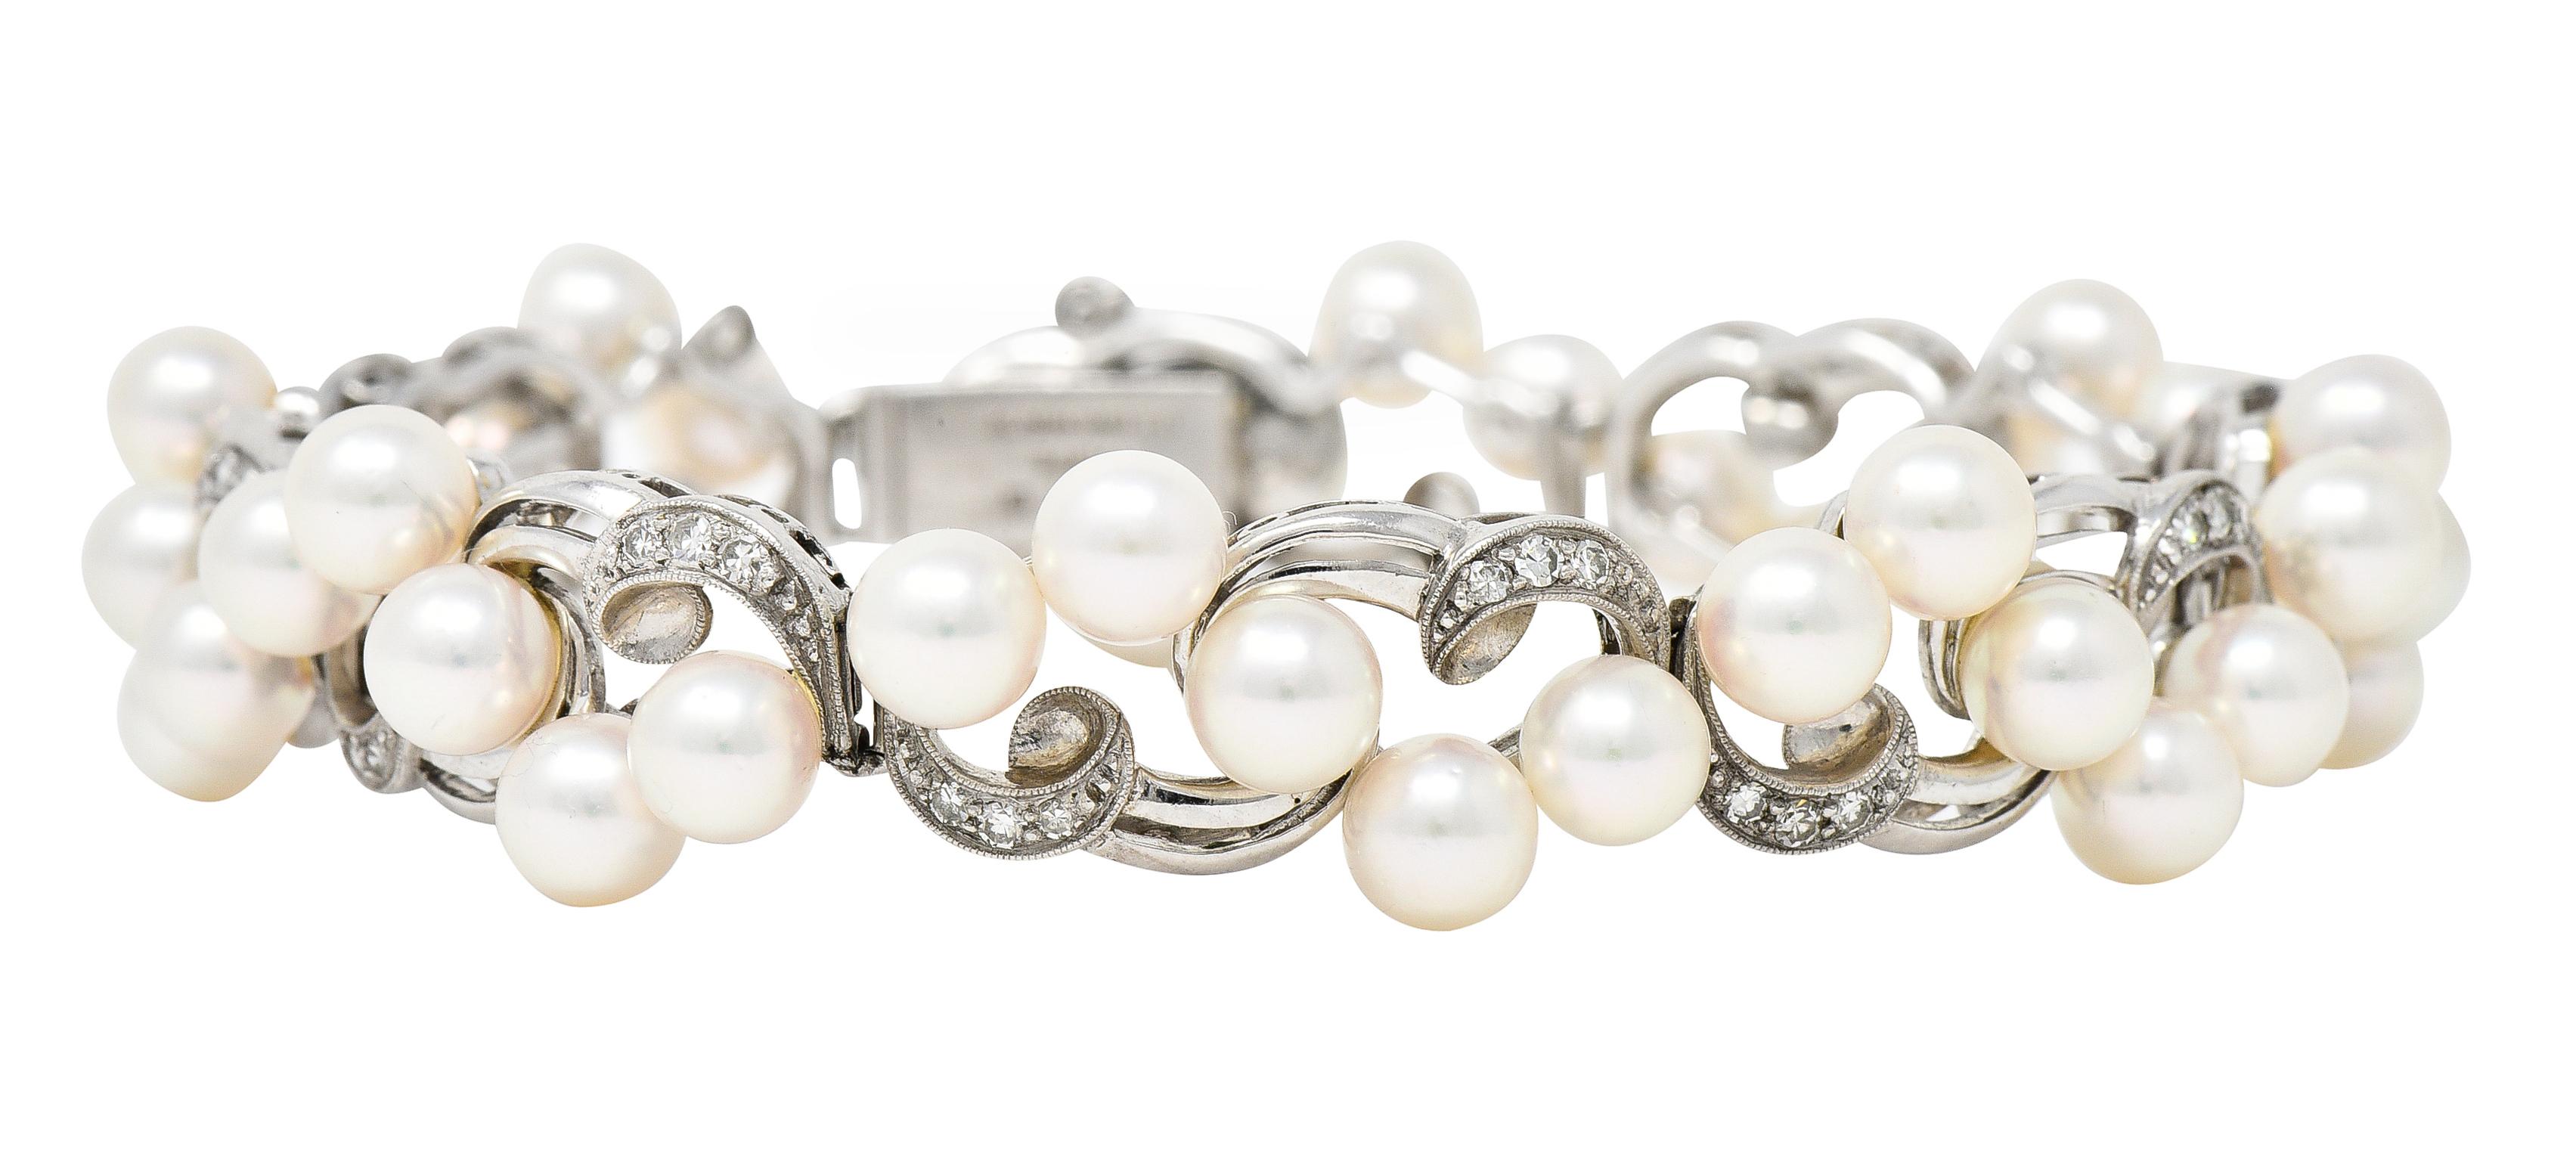 Comprised of hinged scroll motif links each featuring 5.0 mm round cultured pearls. White in body color with strong iridescence and excellent luster. Accented by single cut diamonds bead set in scrolls. Weighing approximately 0.64 carat total. G/H